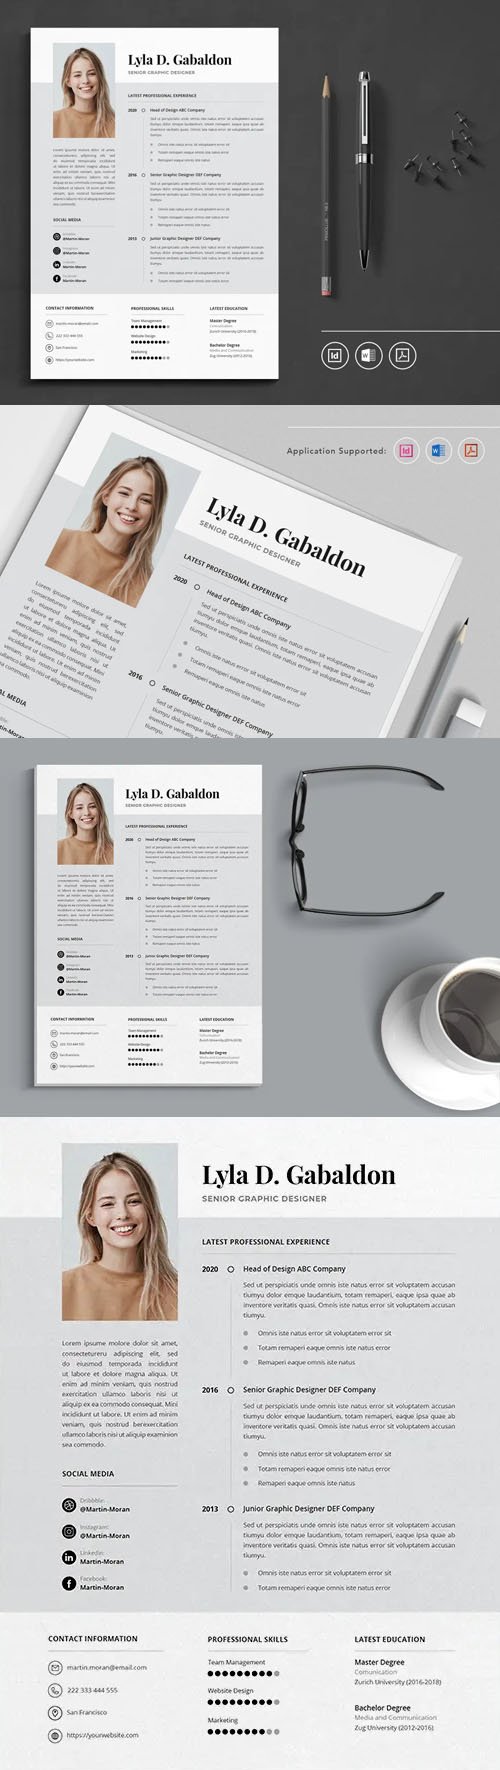 CV Resume Indesign Template   MS WORD Template NULLED org Best